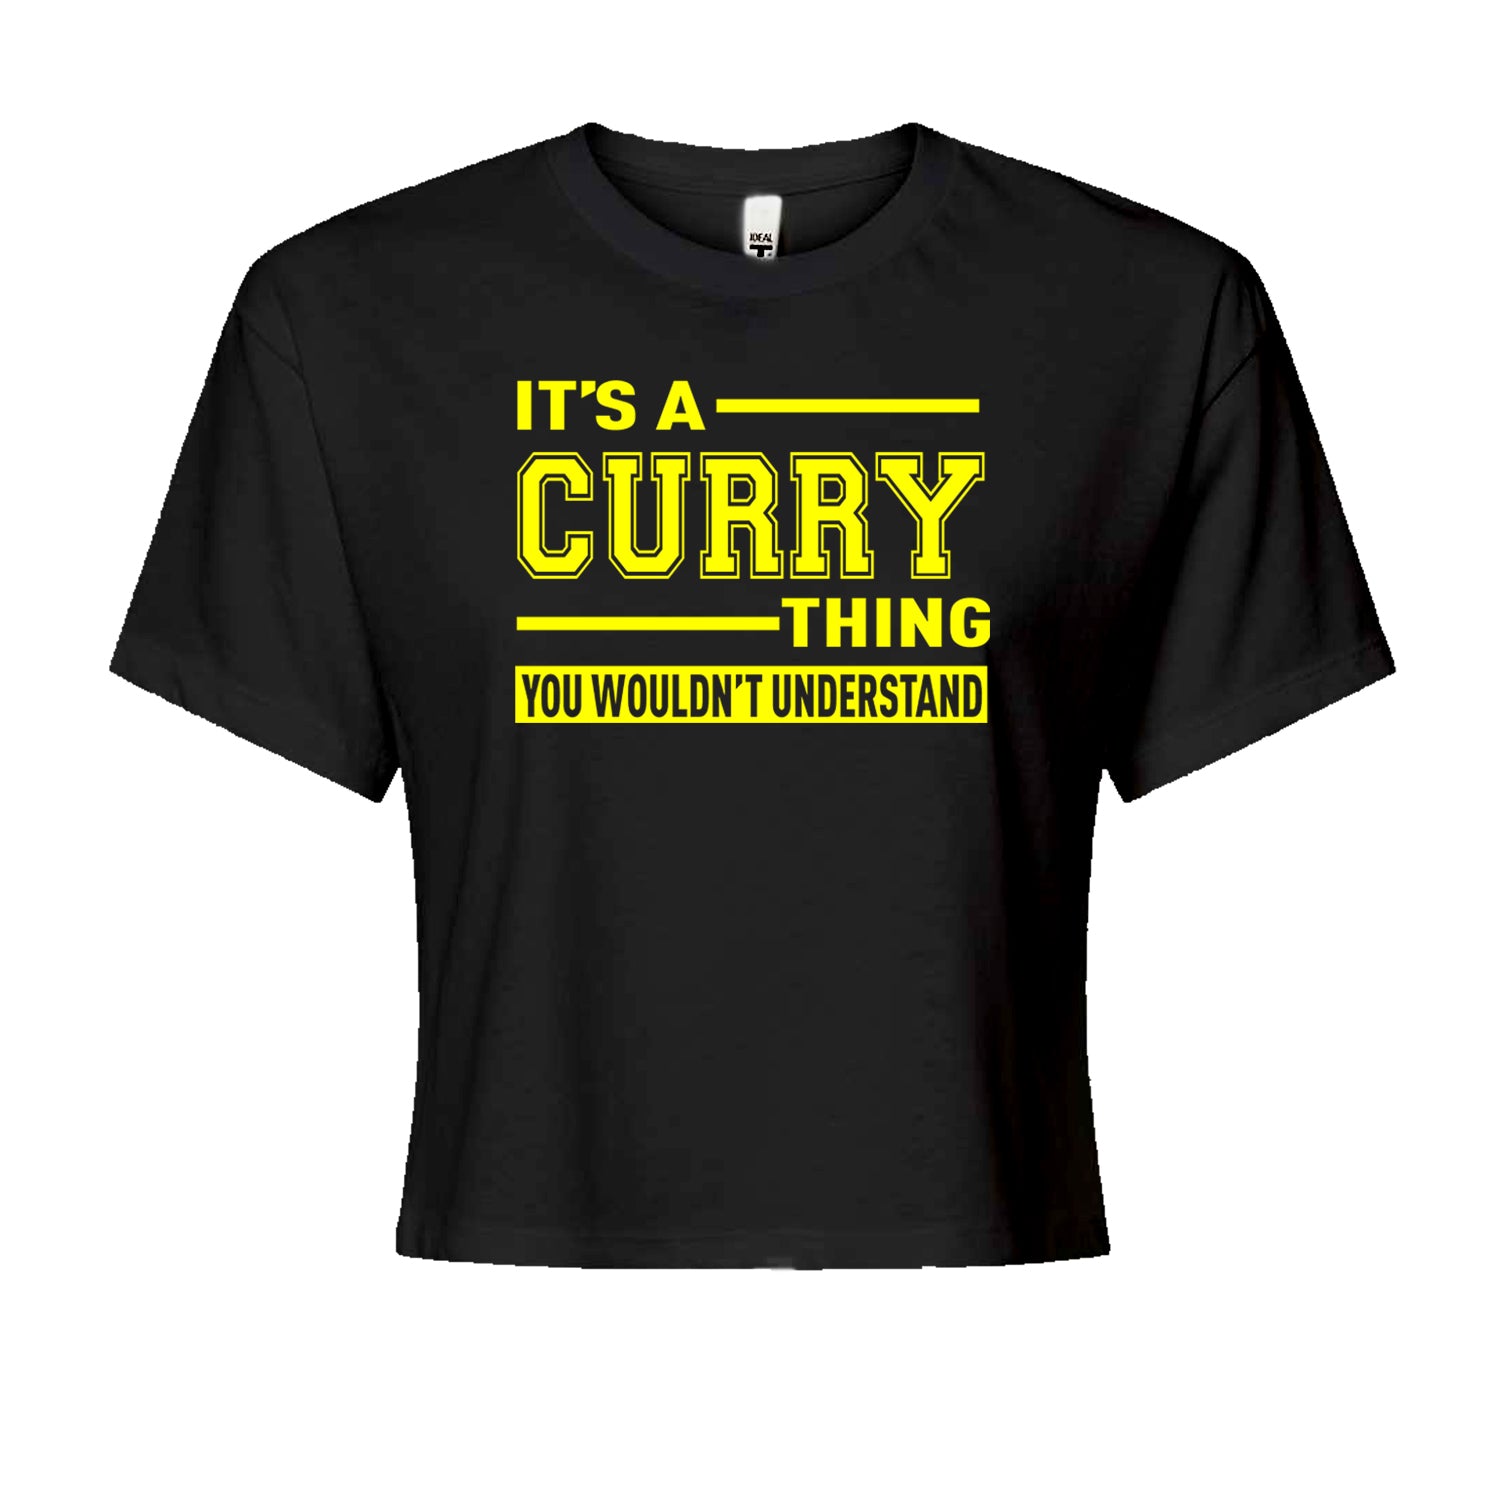 It's A Curry Thing, You Wouldn't Understand Basketball Cropped T-Shirt